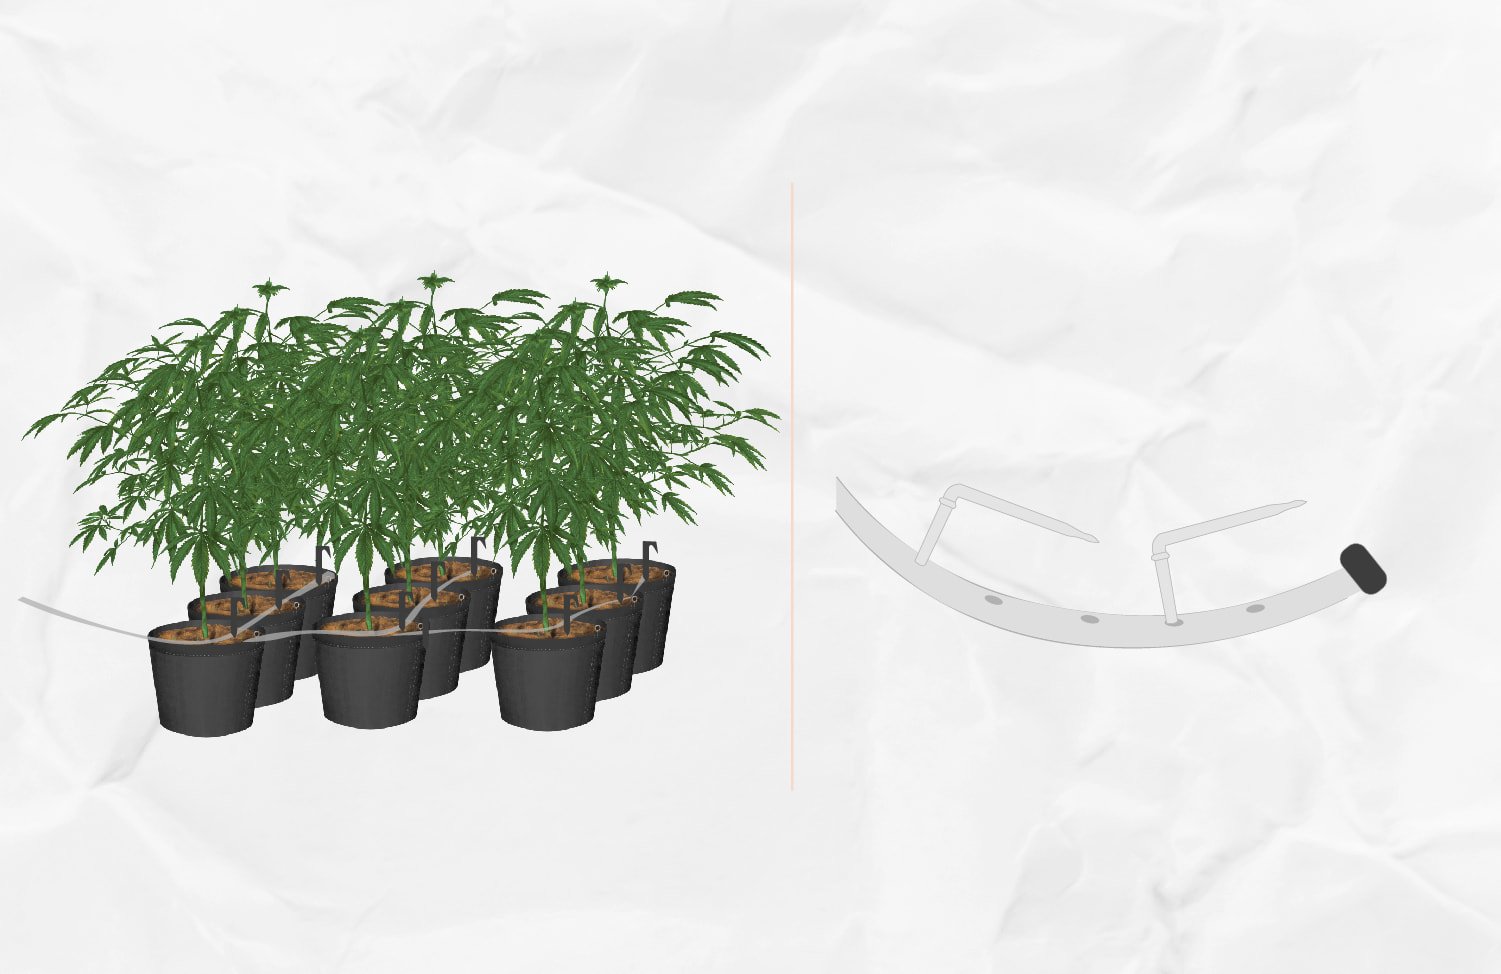 Building Your Own DIY Drip Irrigation System for Growing Cannabis